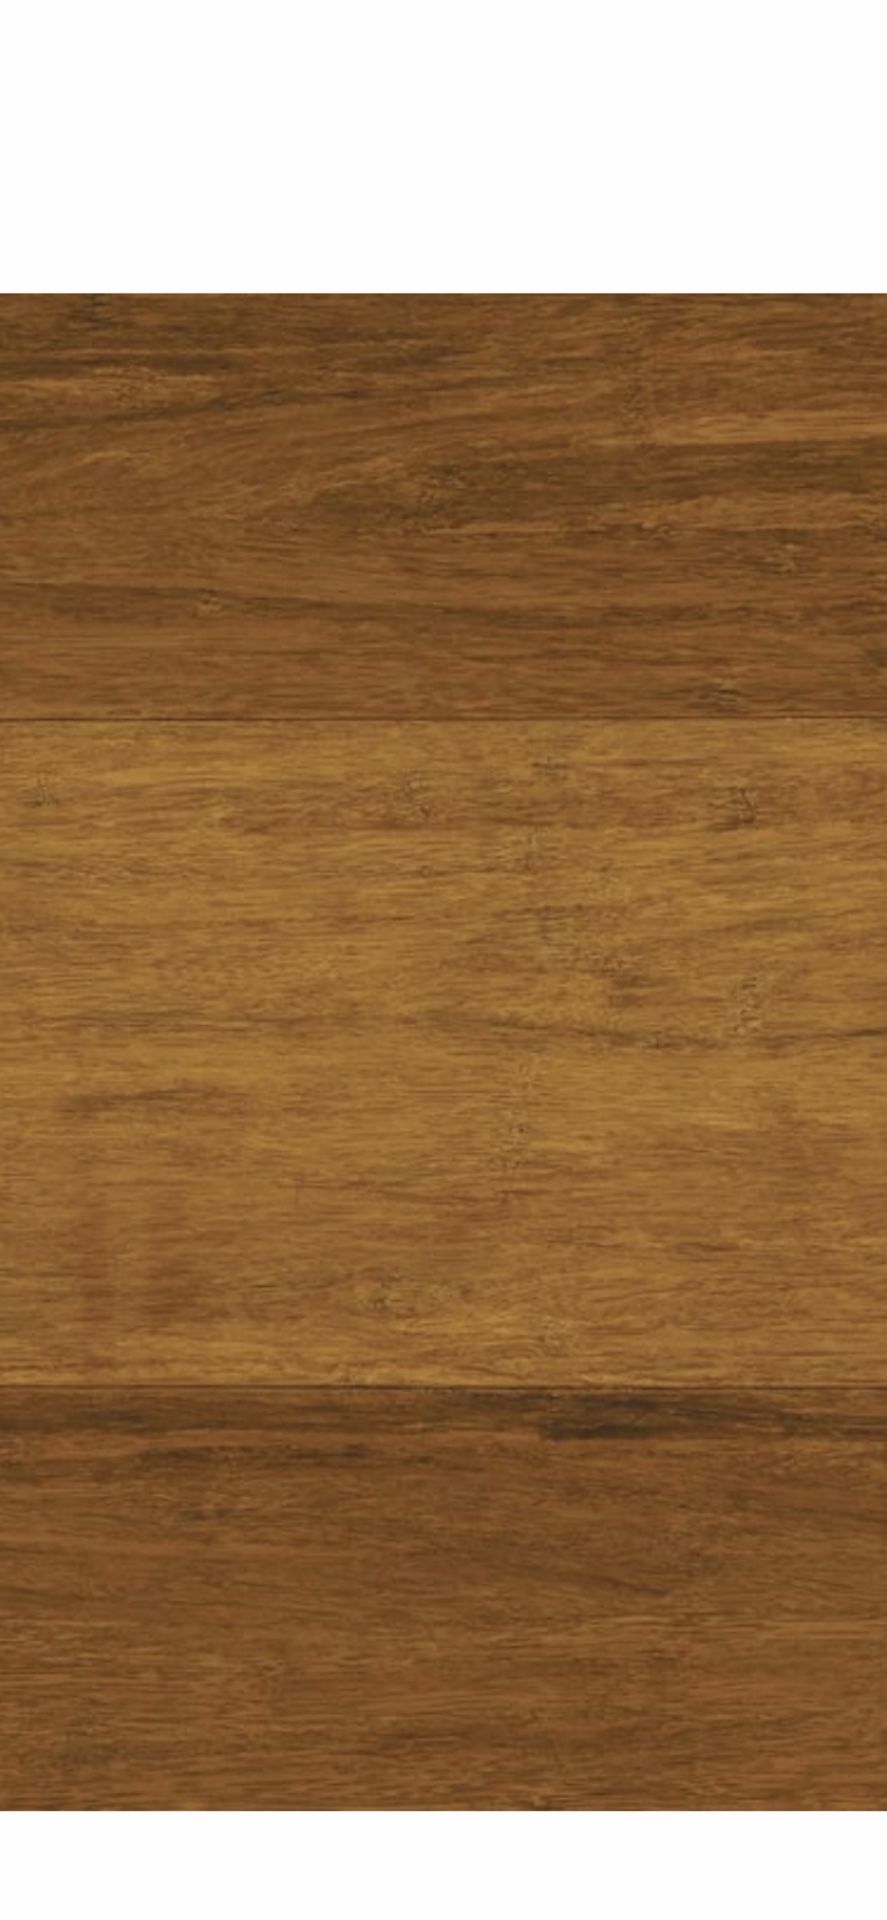 Home Decorators Collection Strand Woven Harvest 3/8 in. T x 4.92 in. W x 36.02 in. L Engineered Click Bamboo Flooring